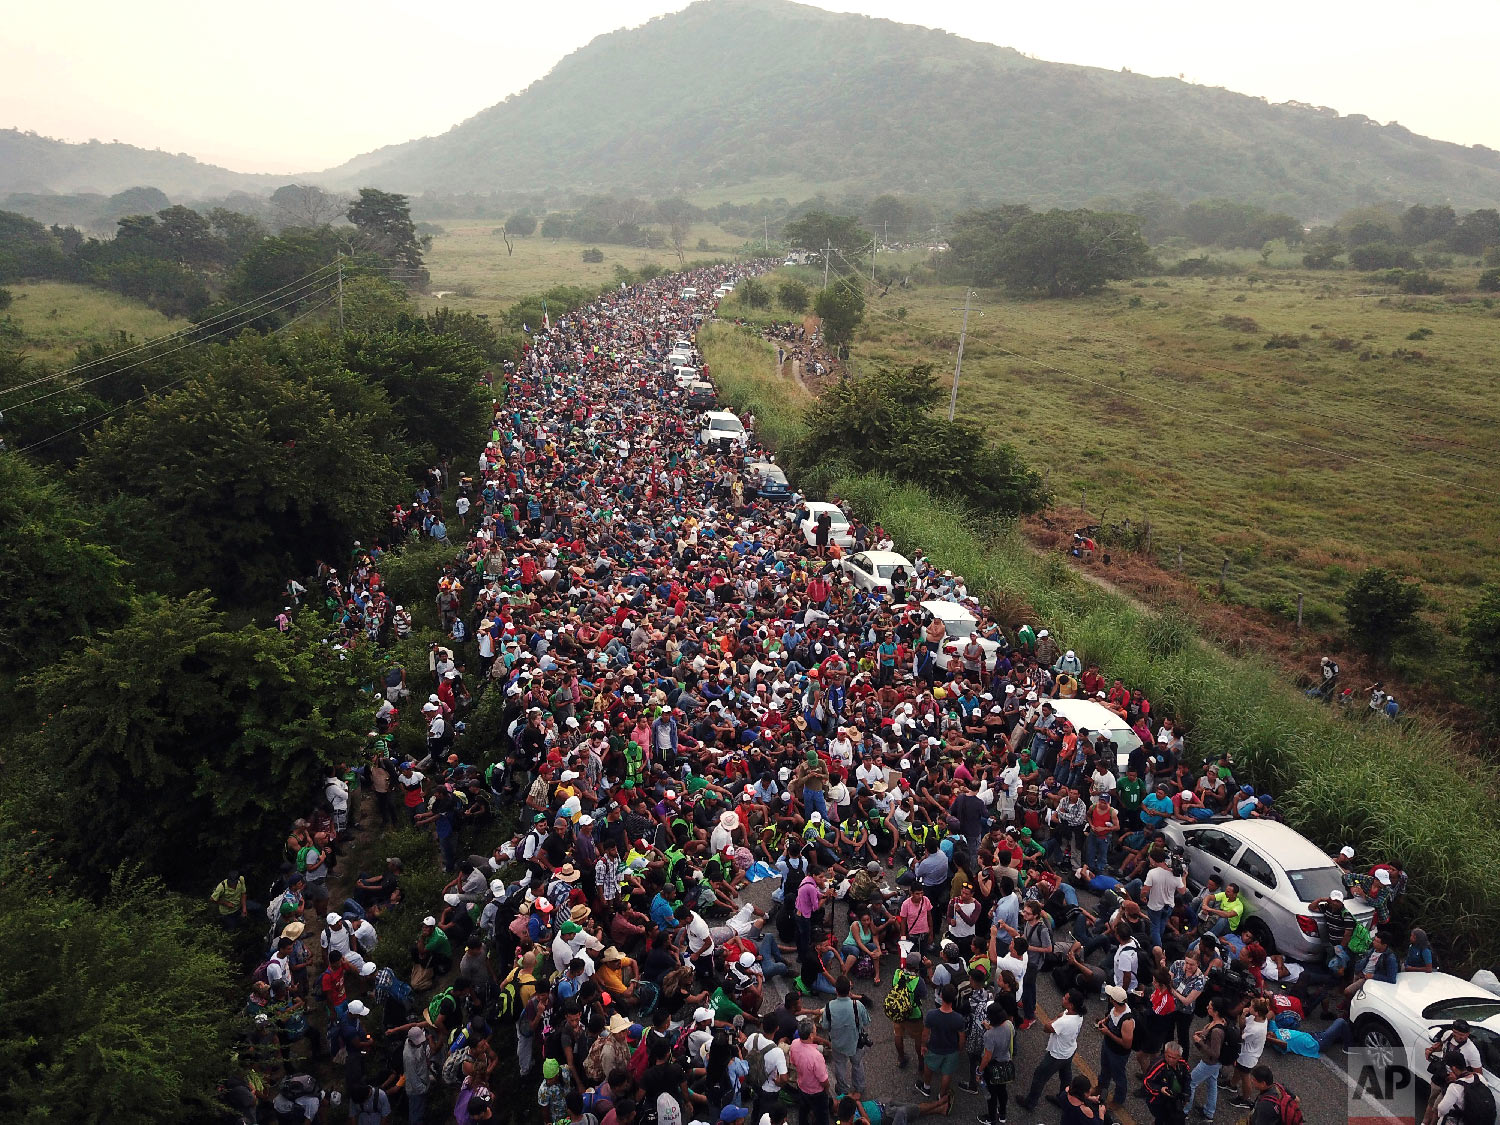  Members of a U.S.-bound migrant caravan stand on a road after federal police briefly blocked their way outside the town of Arriaga, Mexico, on Oct. 27, 2018. (AP Photo/Rodrigo Abd) 